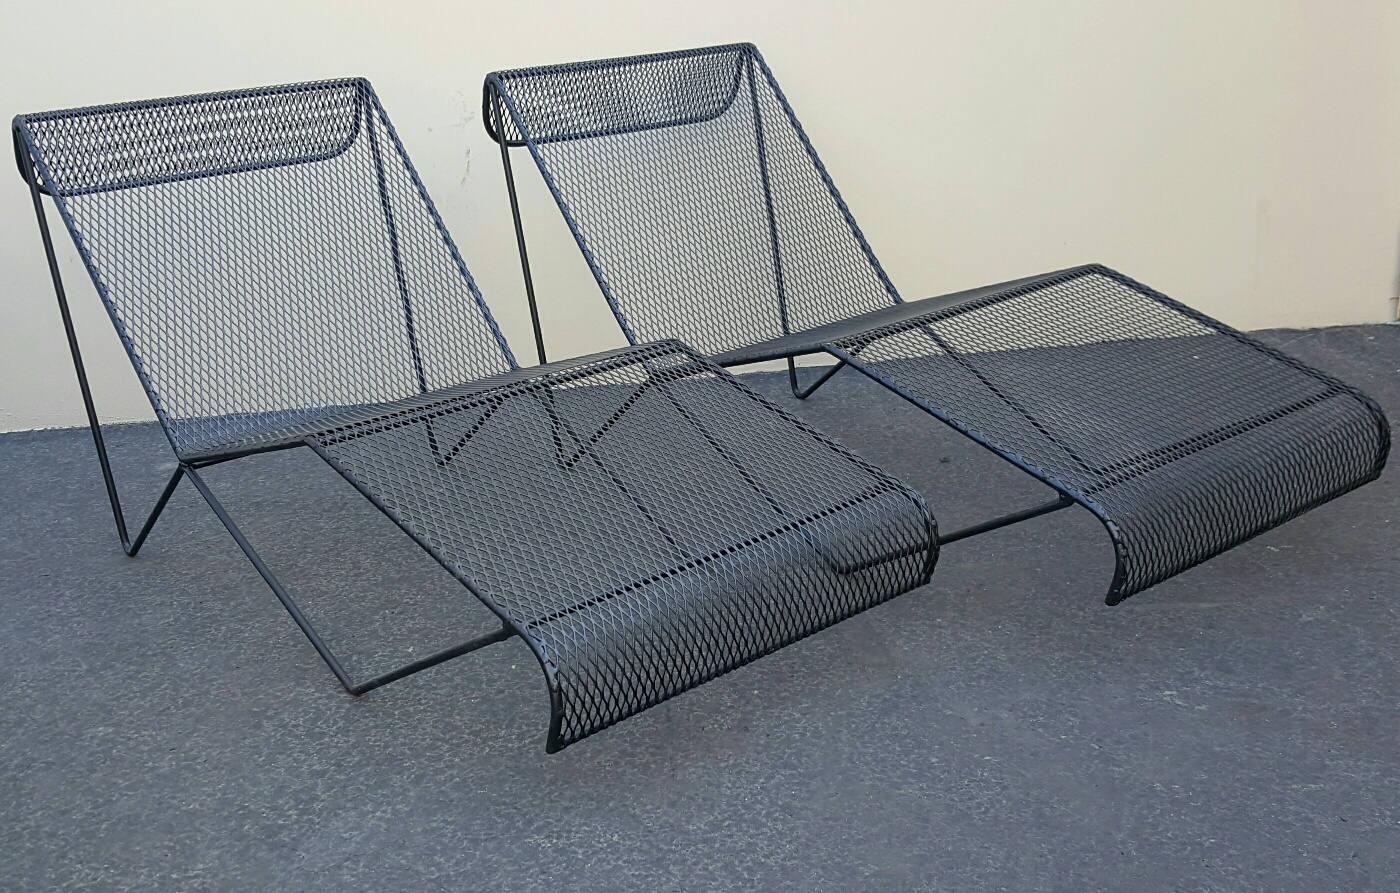 Sculptural pair of vintage wrought iron and Mesh Chaise lounges.

Milo Baughman Style Chaise Lounges by For Pacific Ironworks.

Although there is no label, Many collectors of California modern design have told us that they
agree that the Lounges are